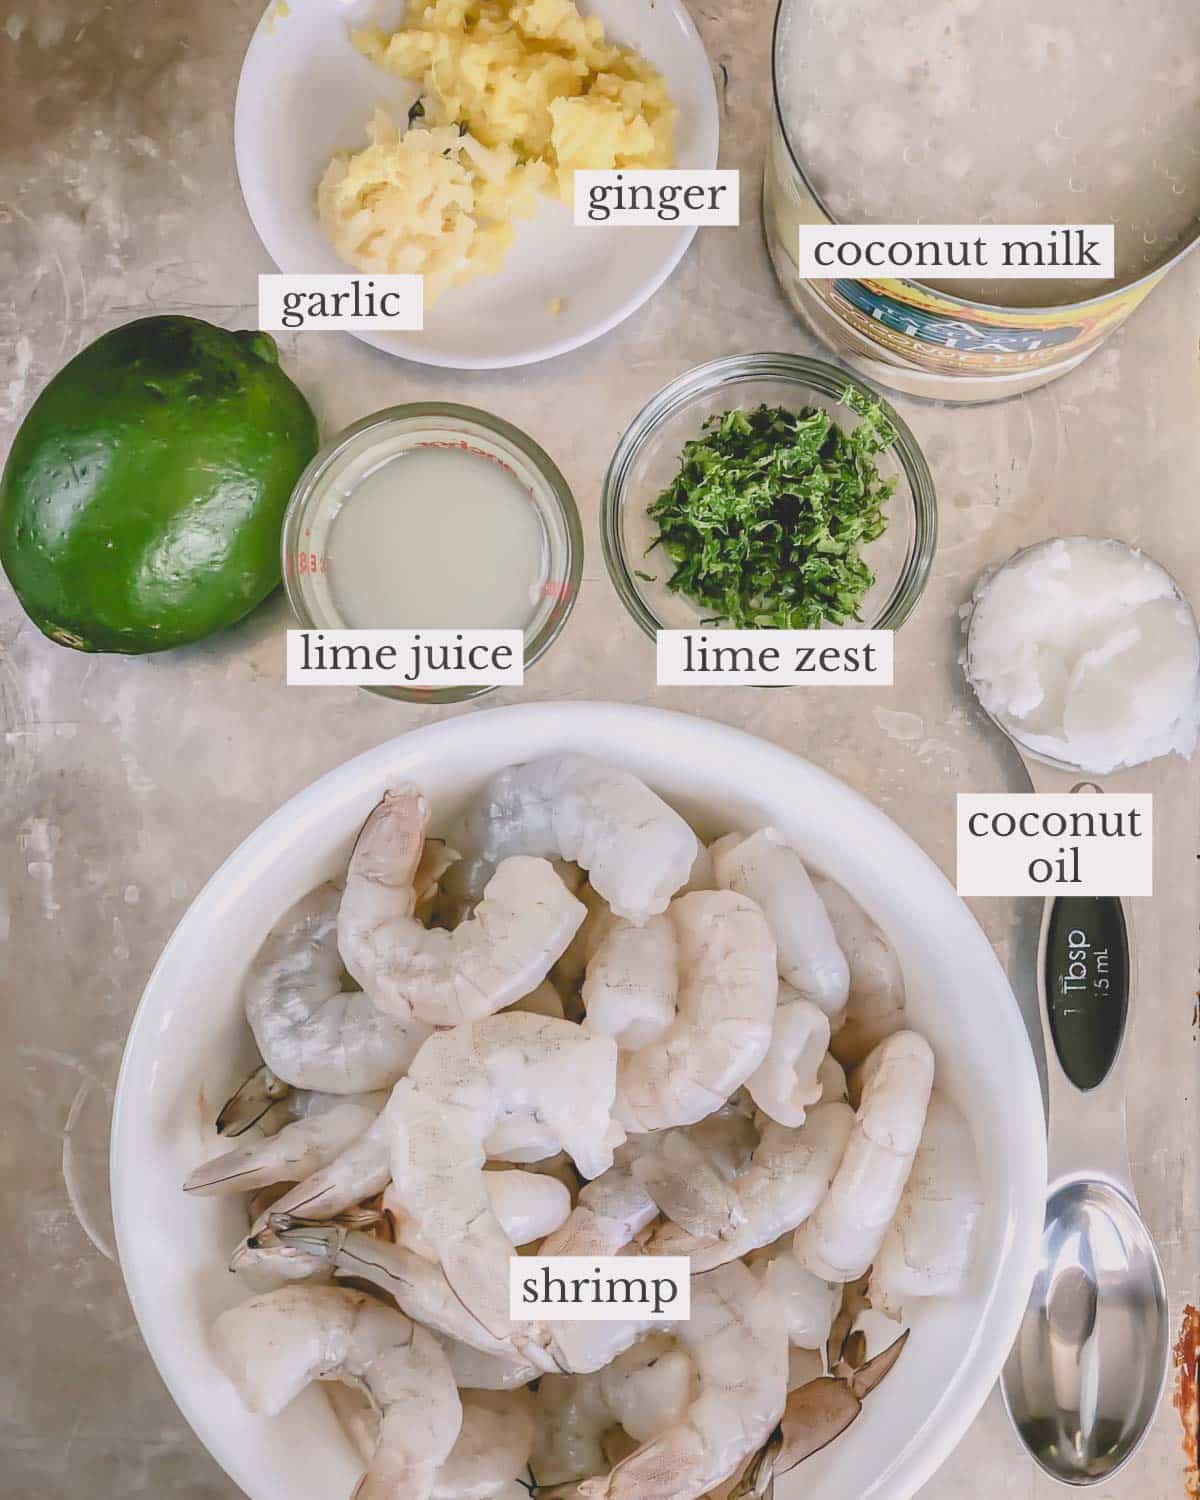 Ingredients needed to make creamy coconut shrimp with garlic, ginger, and lime.